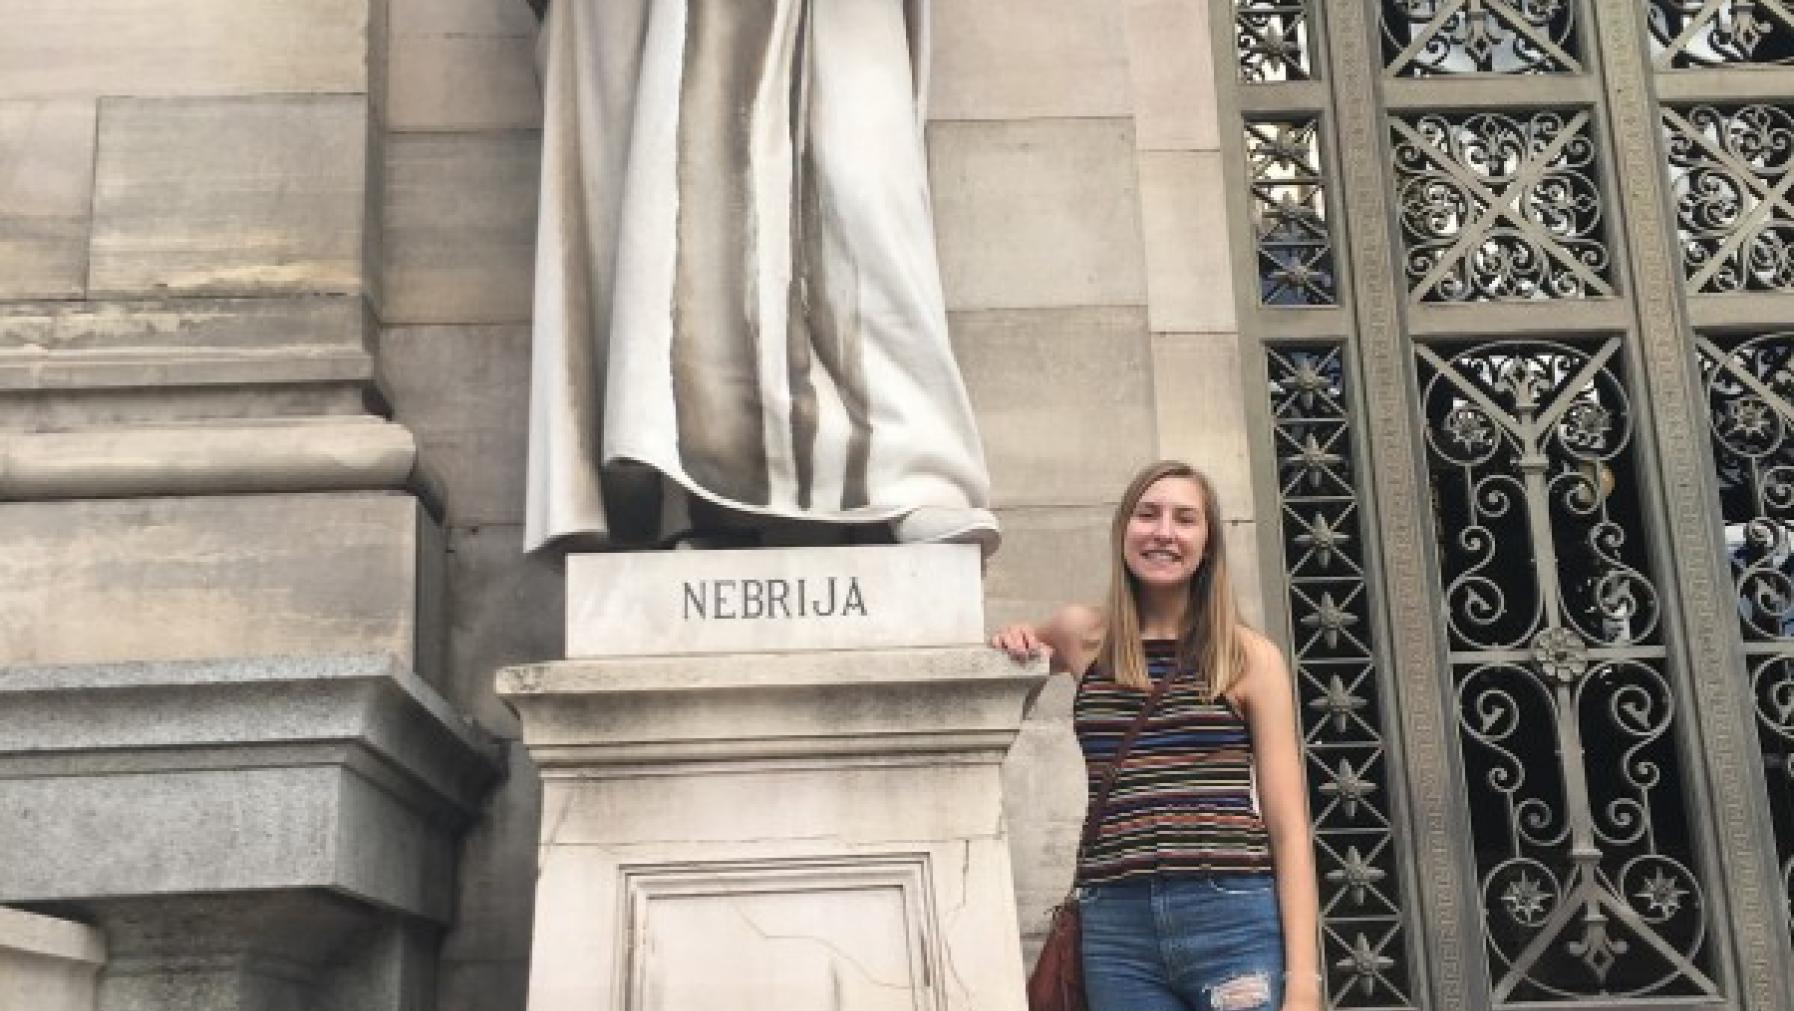 A person standing next to a statue.